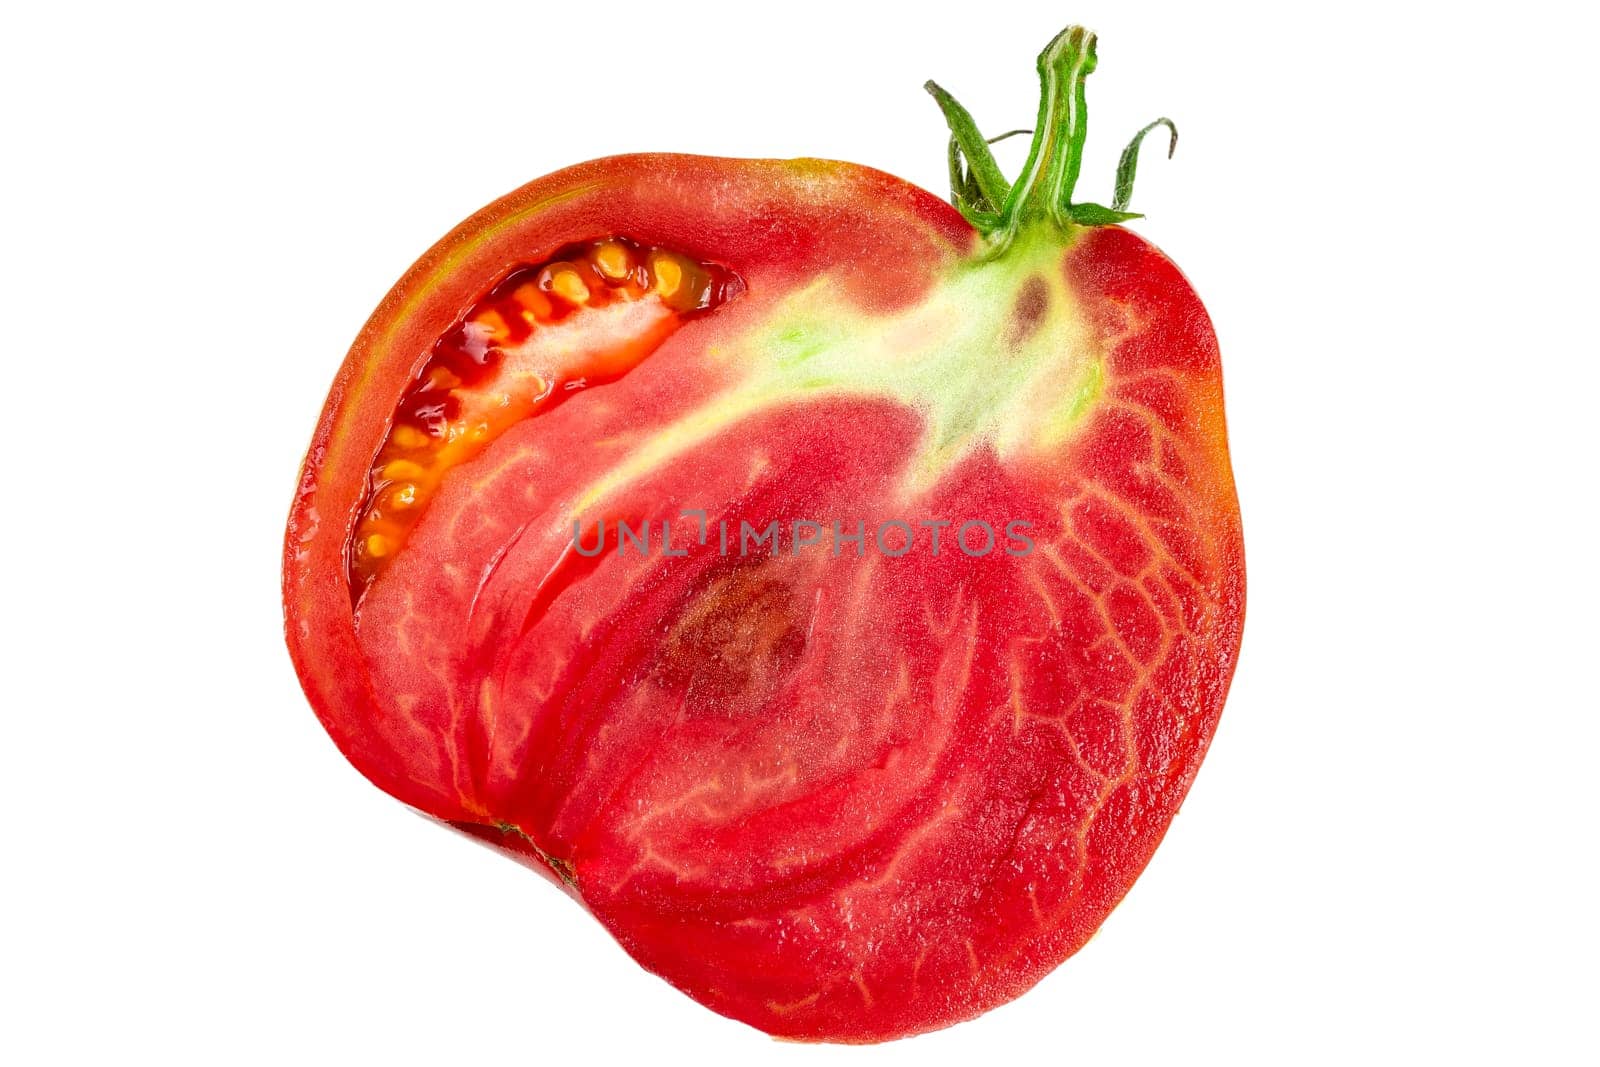 Tomato half isolated on white background. . Tomatoes side view. .